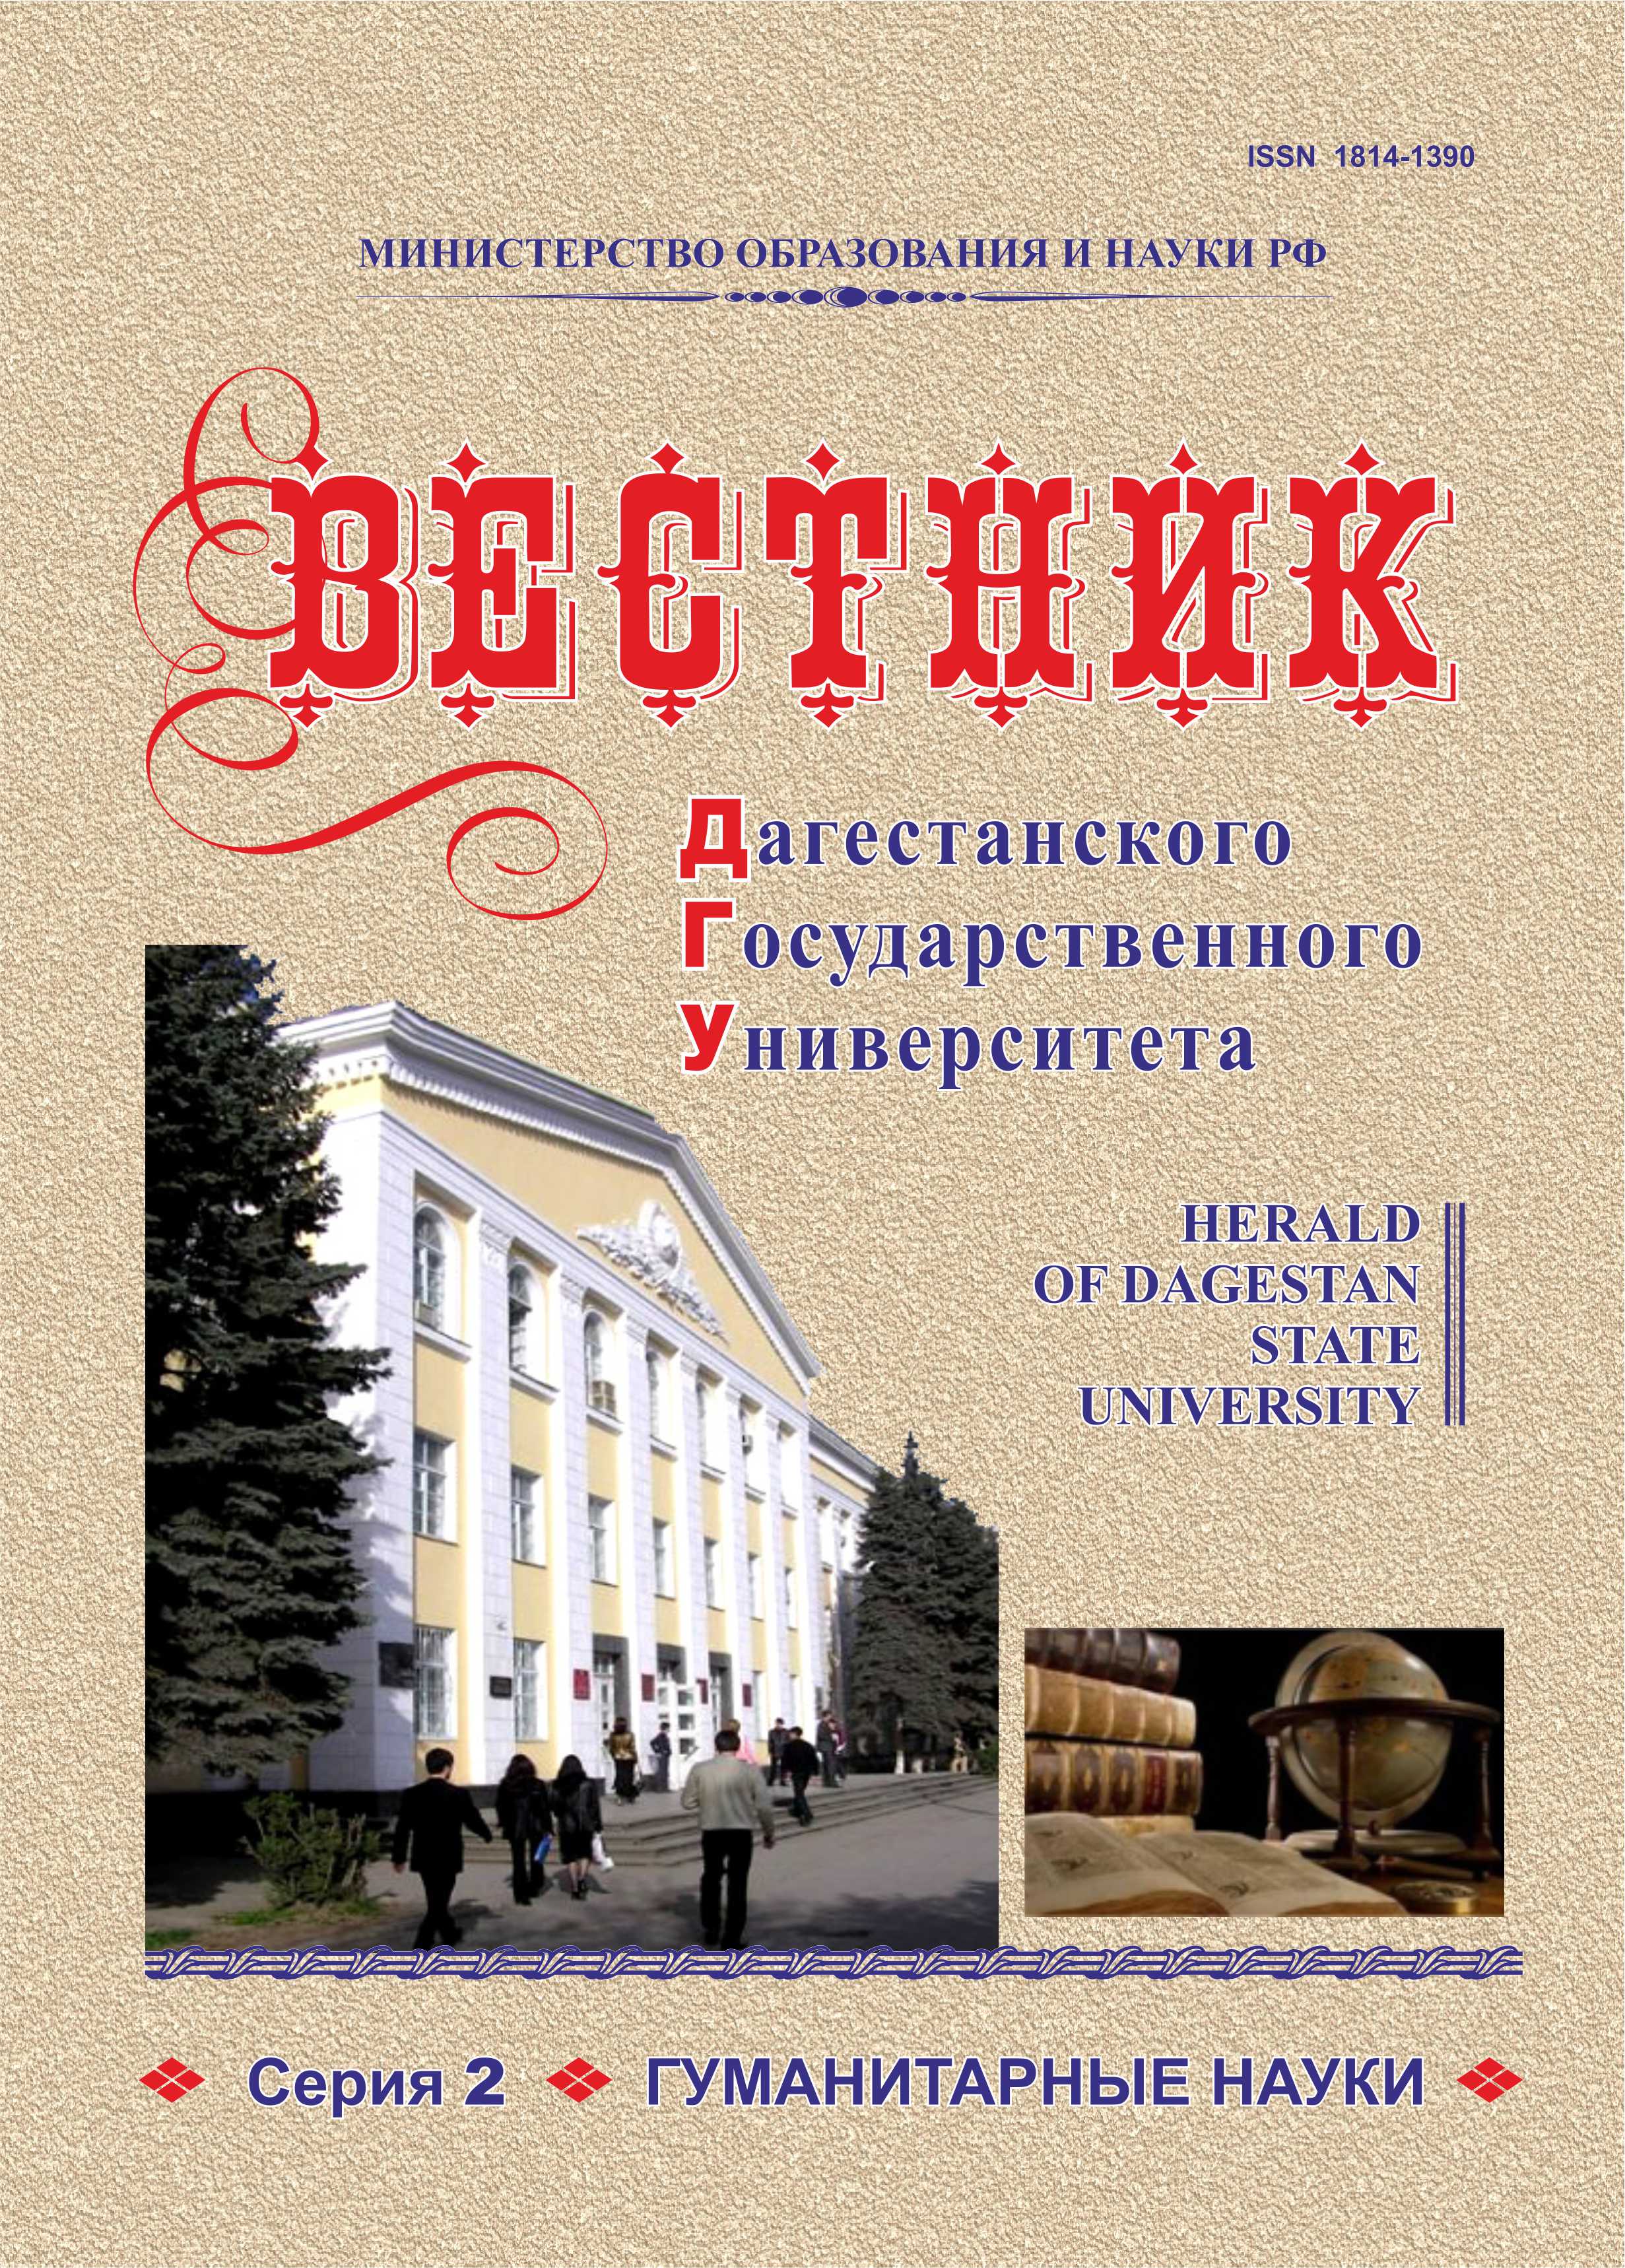 PhD on philology Kamil Adishirinov’s article named«Шекинский рабочий» (“ Publication history and literary - cultural content of Sheki fehlesi “) newspaper was published